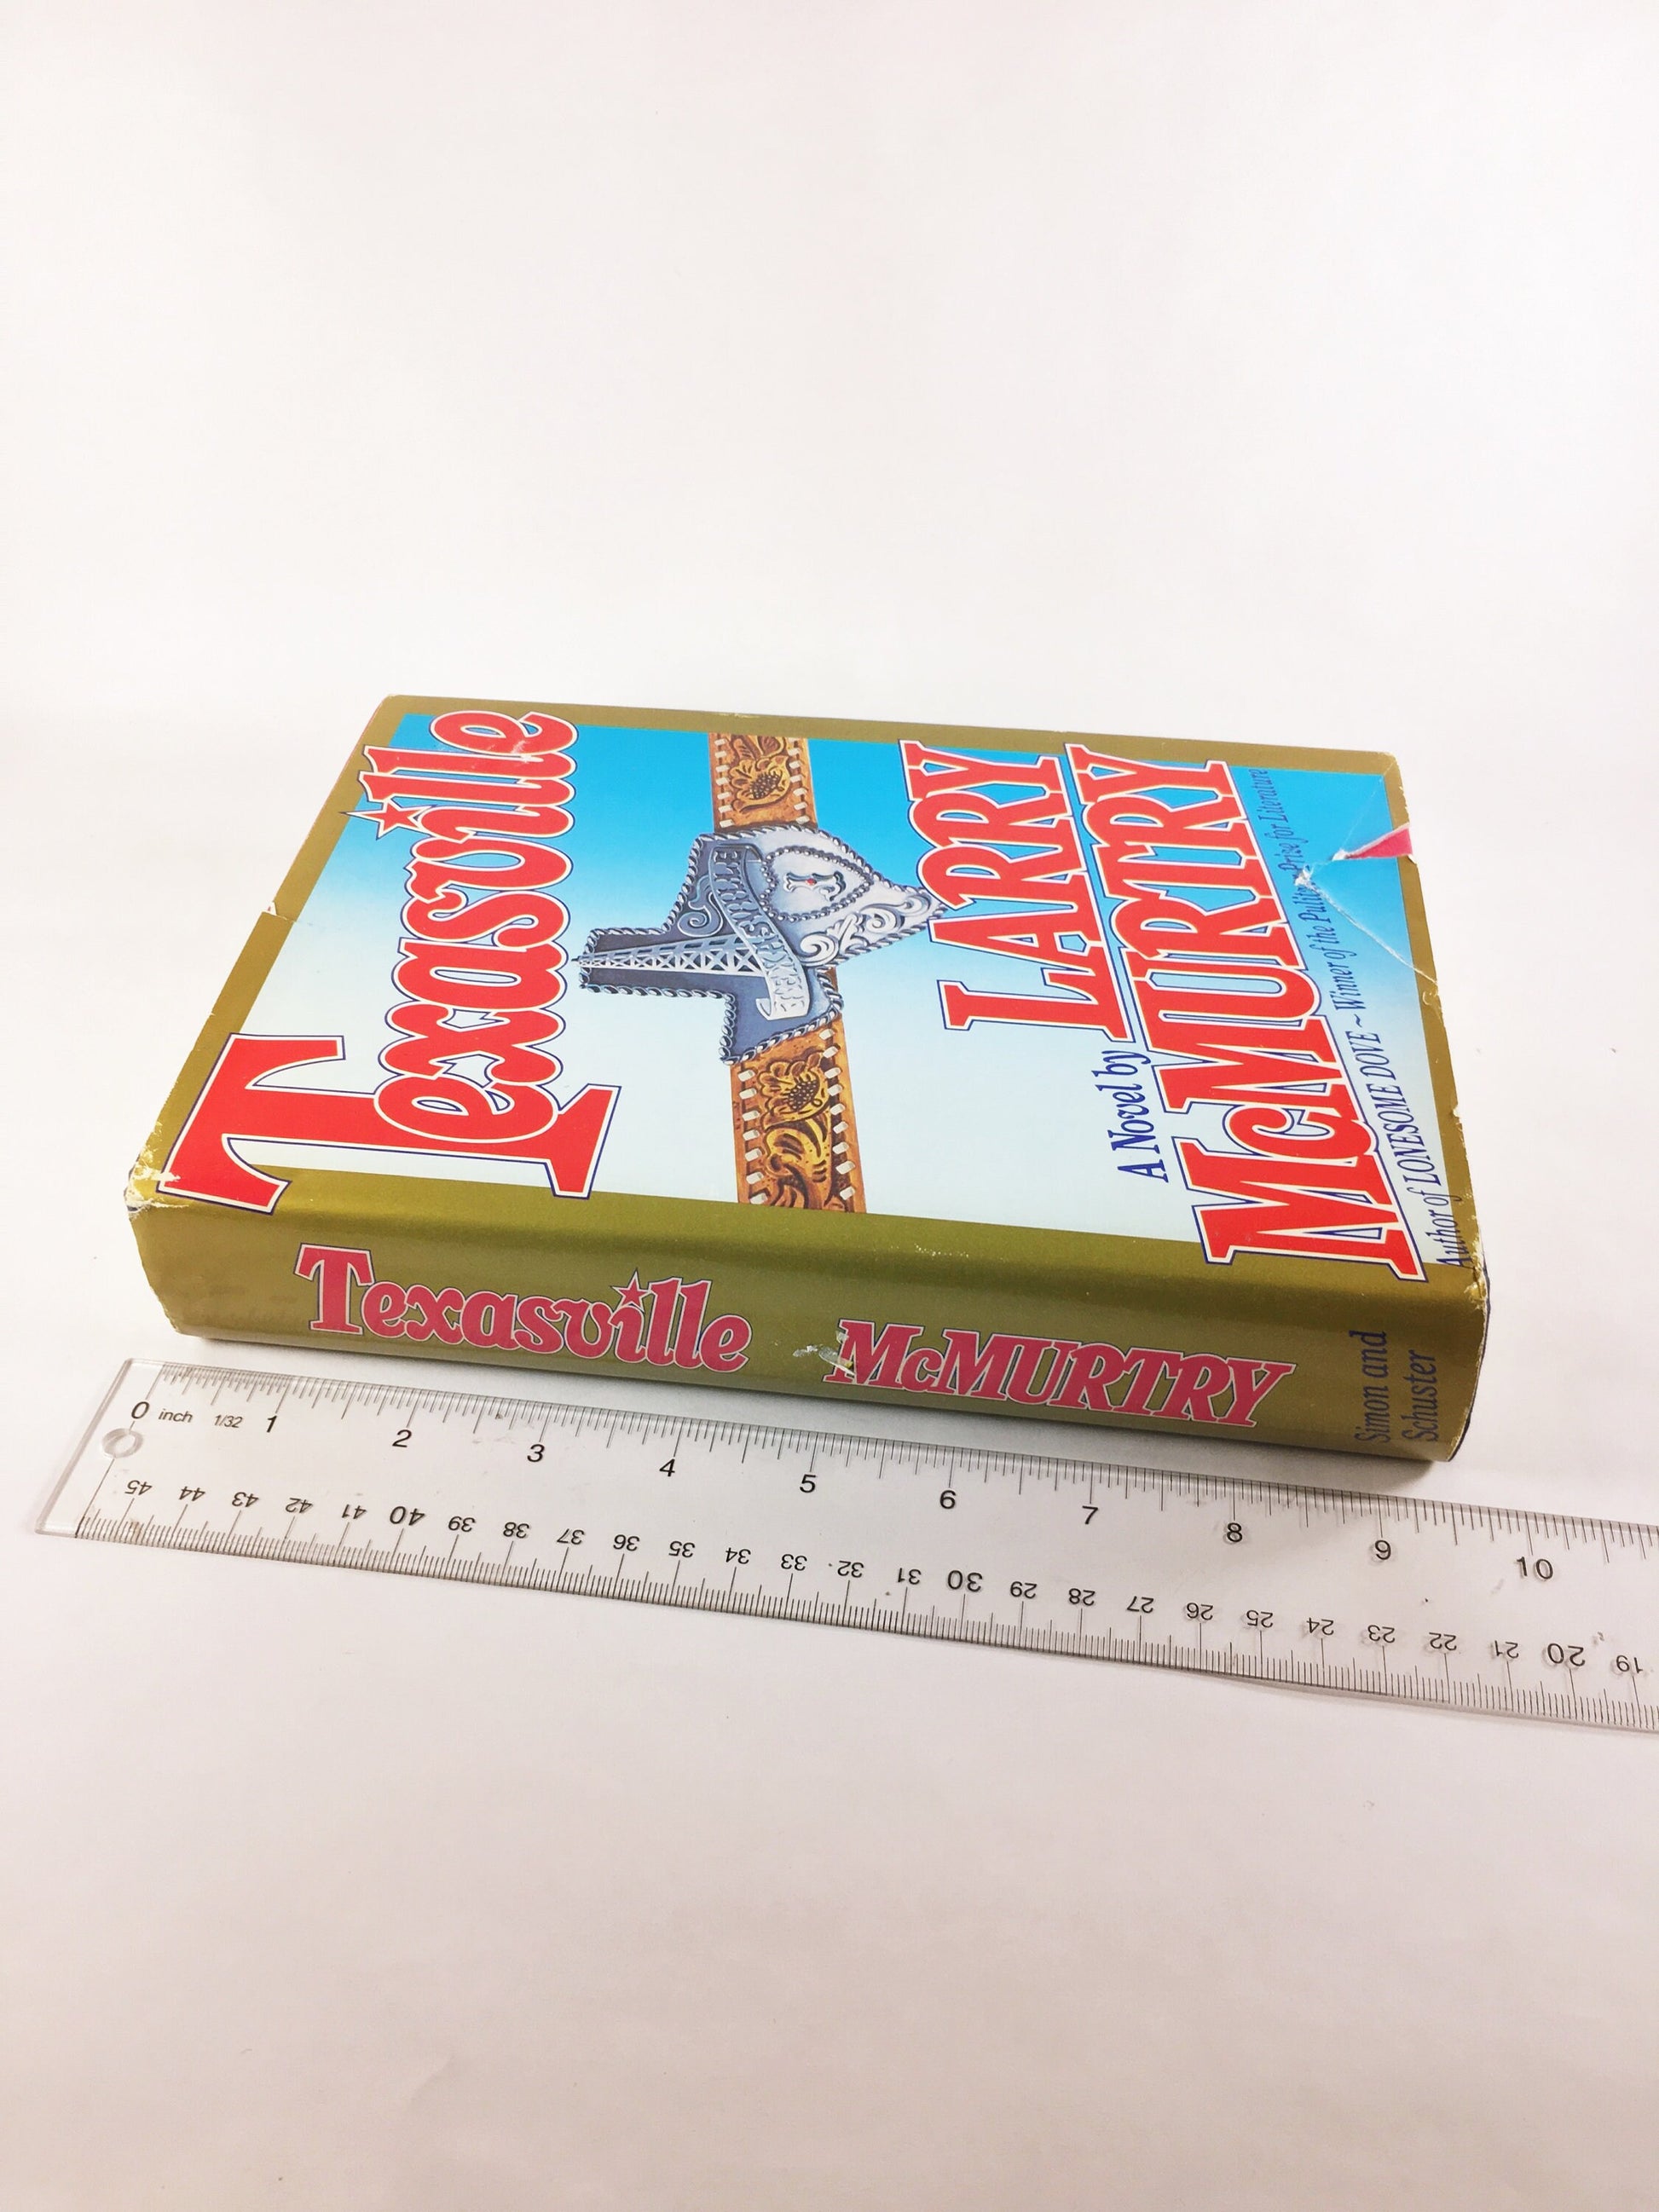 Texasville by Larry McMurtry Vintage FIRST EDITION book circa 1987. Lonesome Dove saga. Pulitzer Prize Western The Last Picture Show